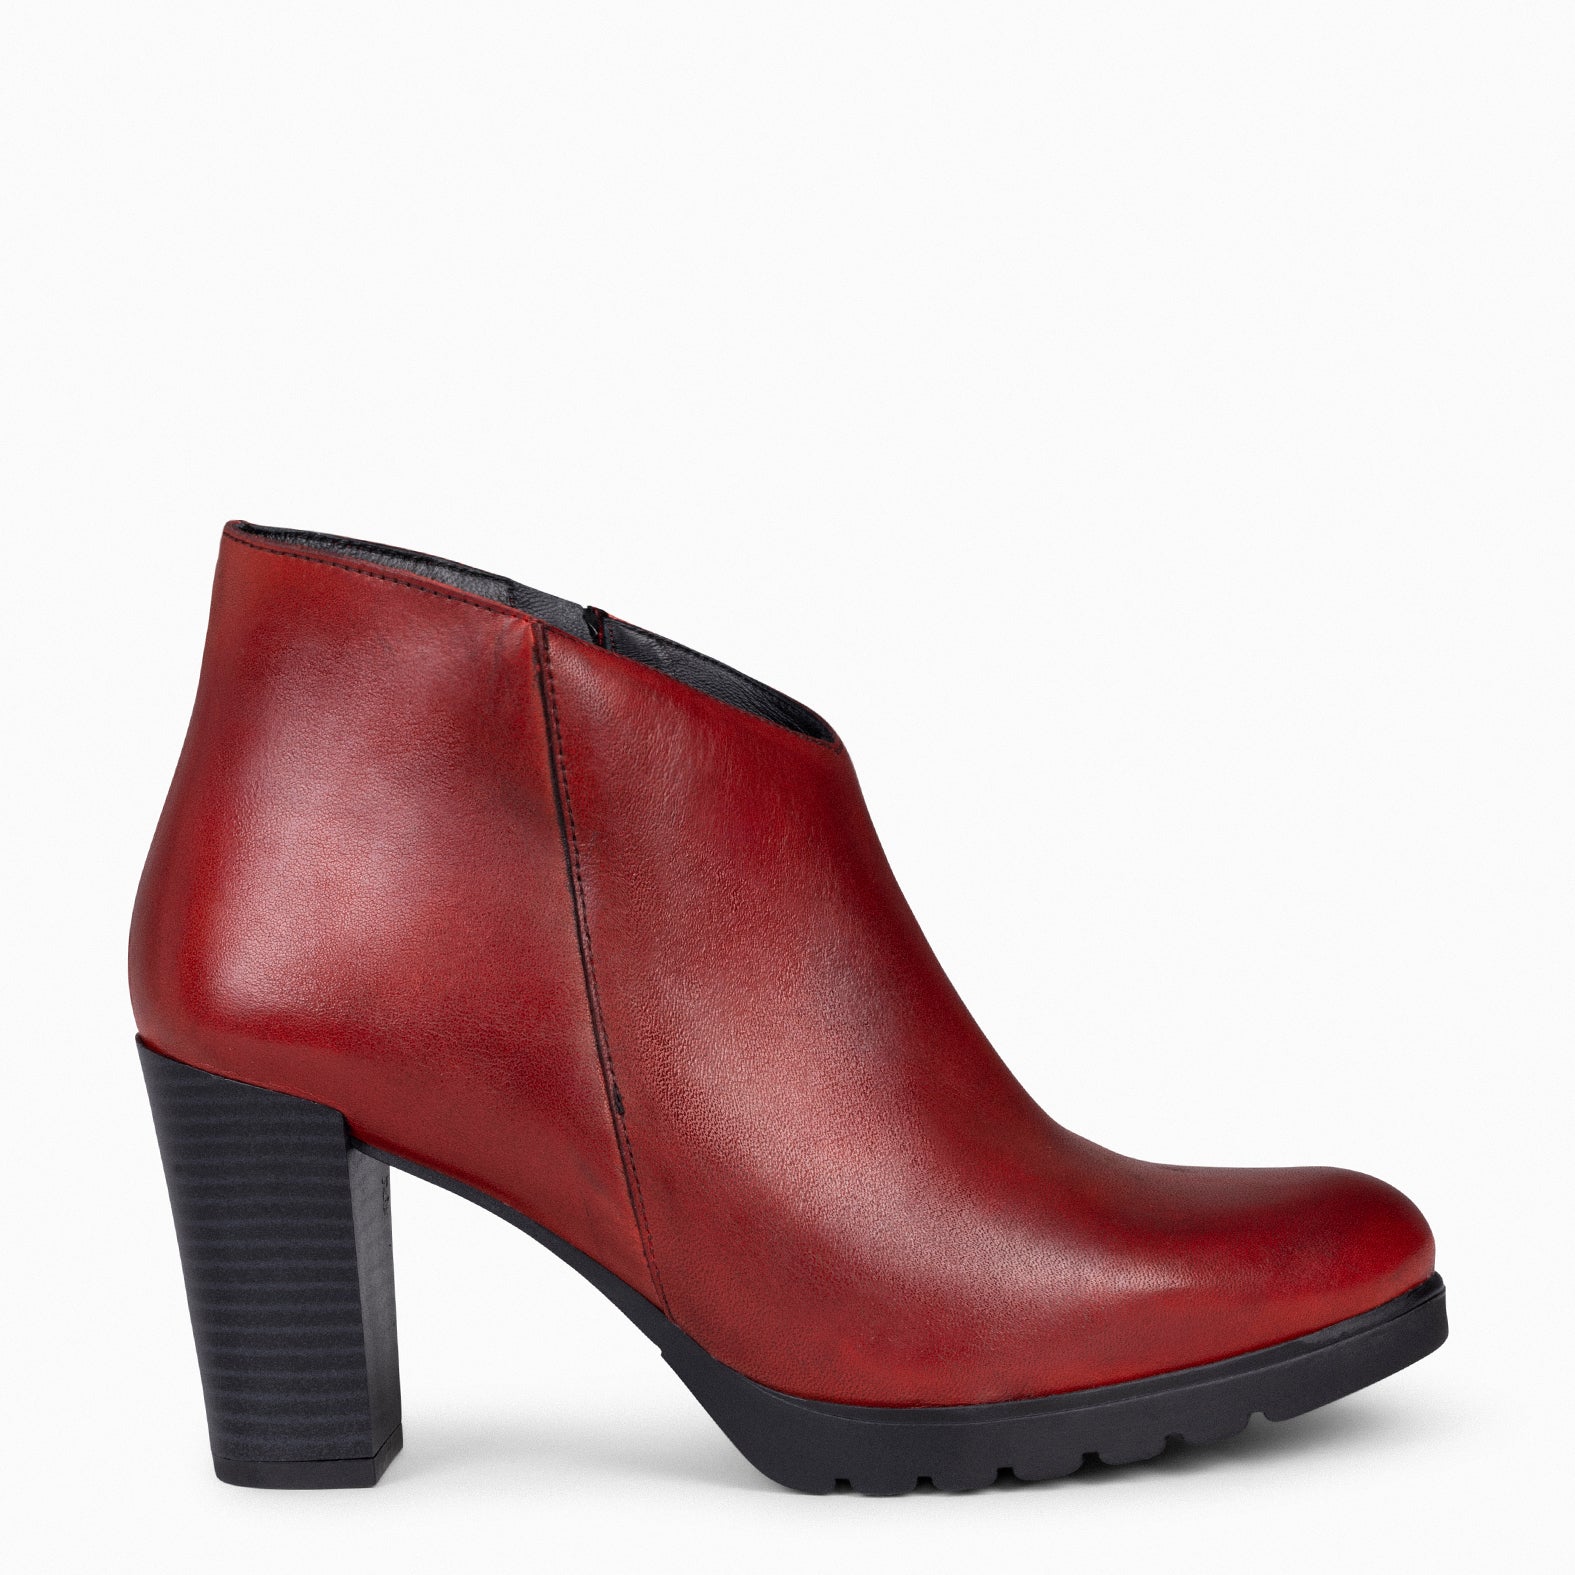 CLASSIC - BURGUNDY Women's Ankle Boots with heel